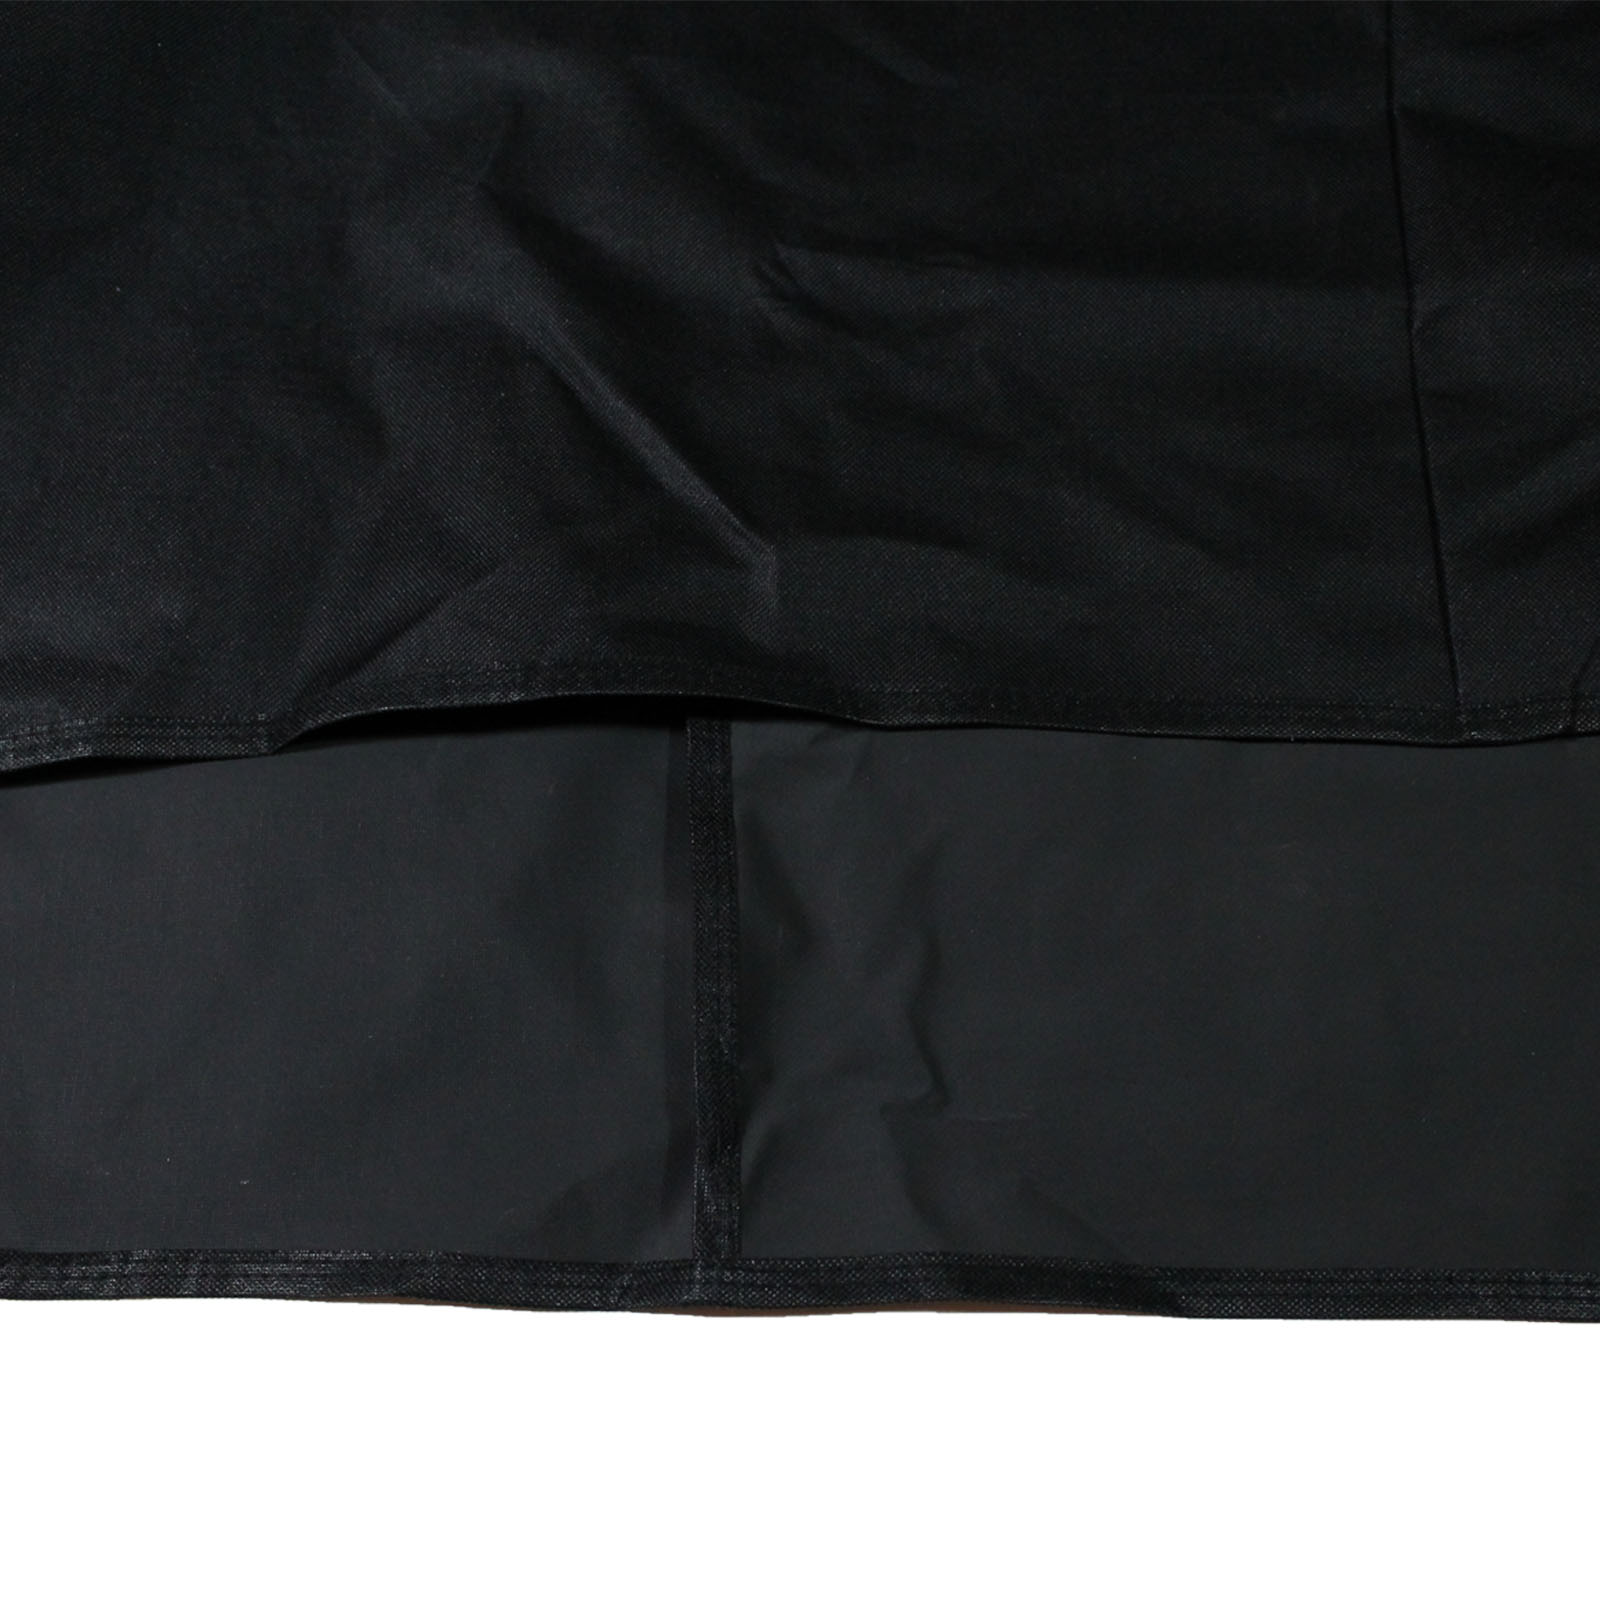 Gas Grill Cover Heavy Duty Waterproof Replacement for Weber 7109 - 74.8 inch L x 26.8 inch W x 47 inch H - image 2 of 6